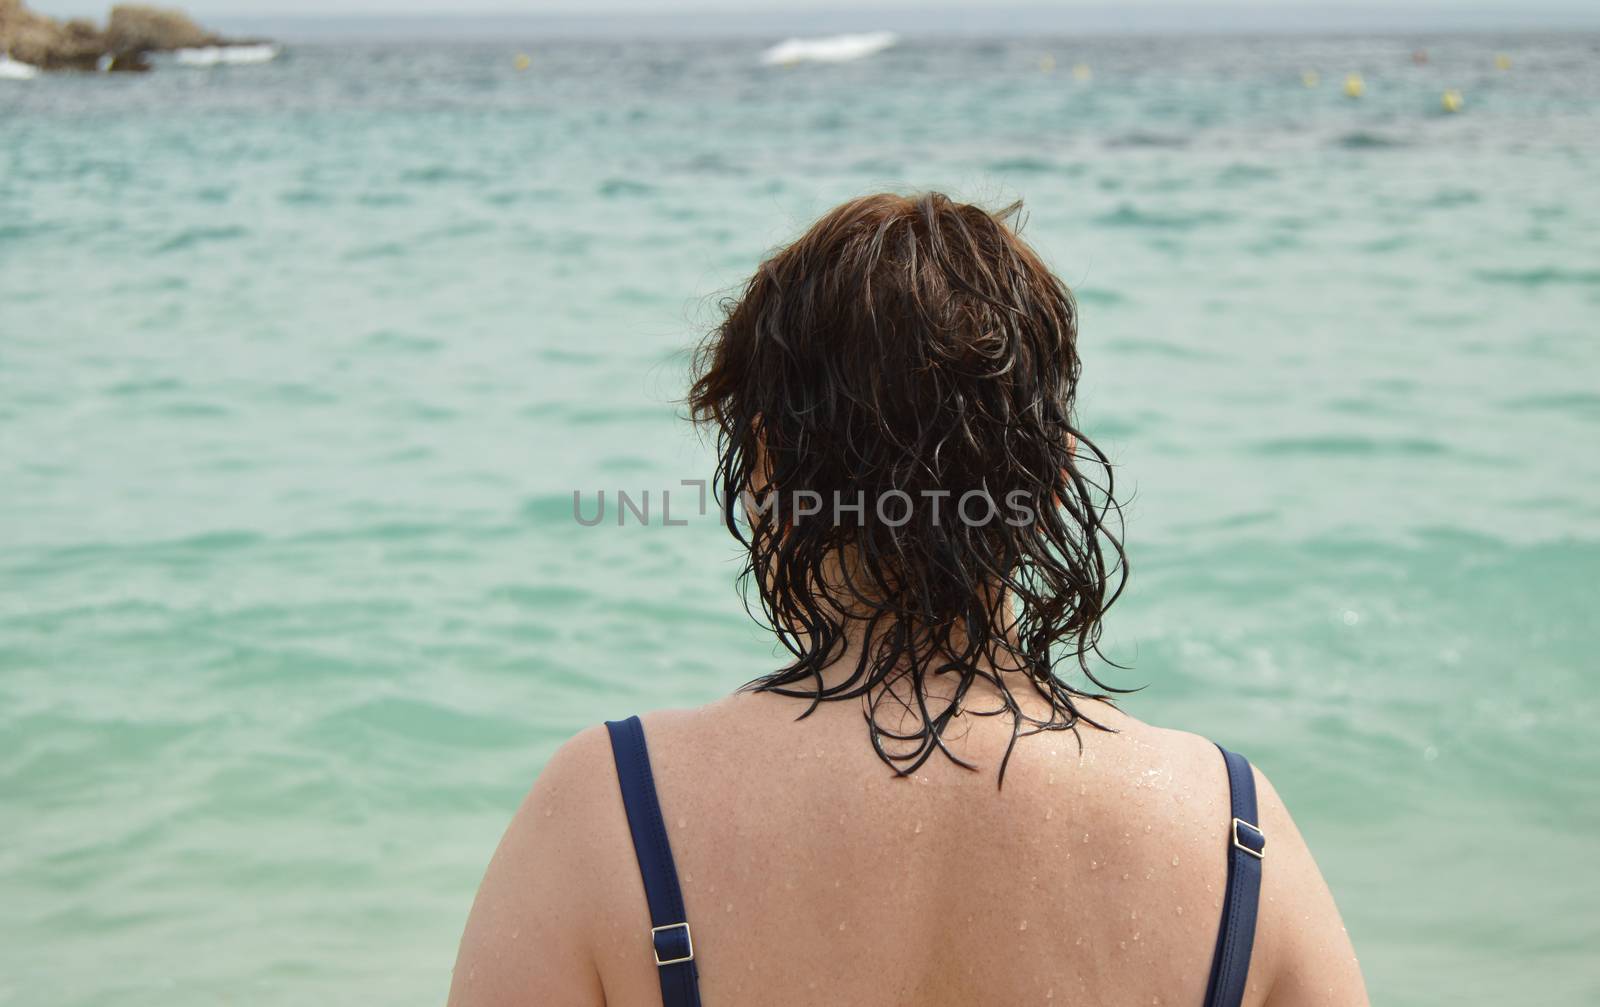 View of the back of an adult woman in a swimsuit with wet hair, standing on the beach and admiring the sun glare on the sea,